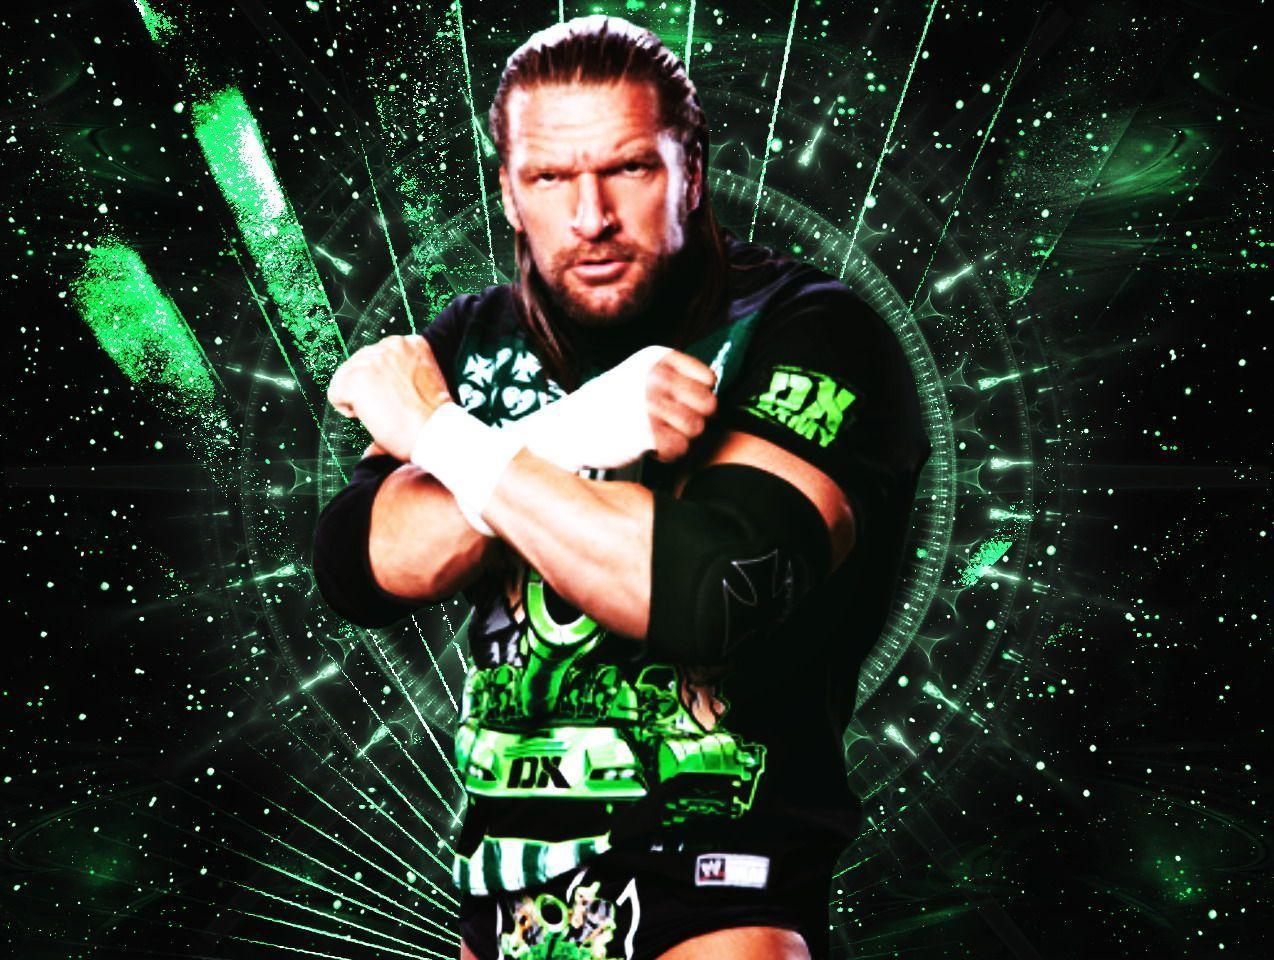 hhh wallpaper i - Image And Wallpaper free to download